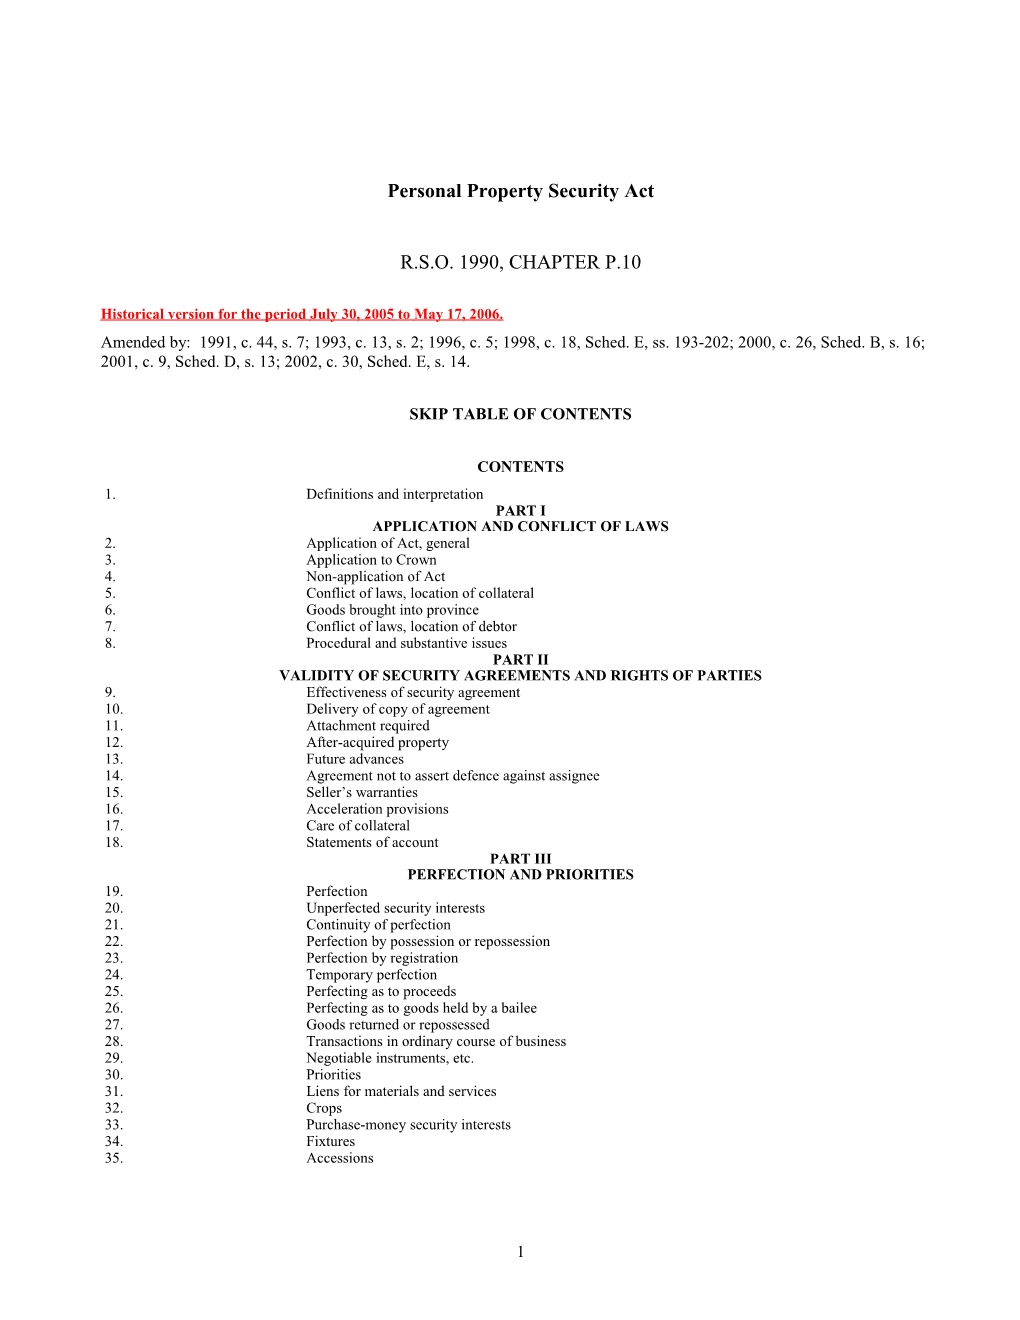 Personal Property Security Act, R.S.O. 1990, C. P.10